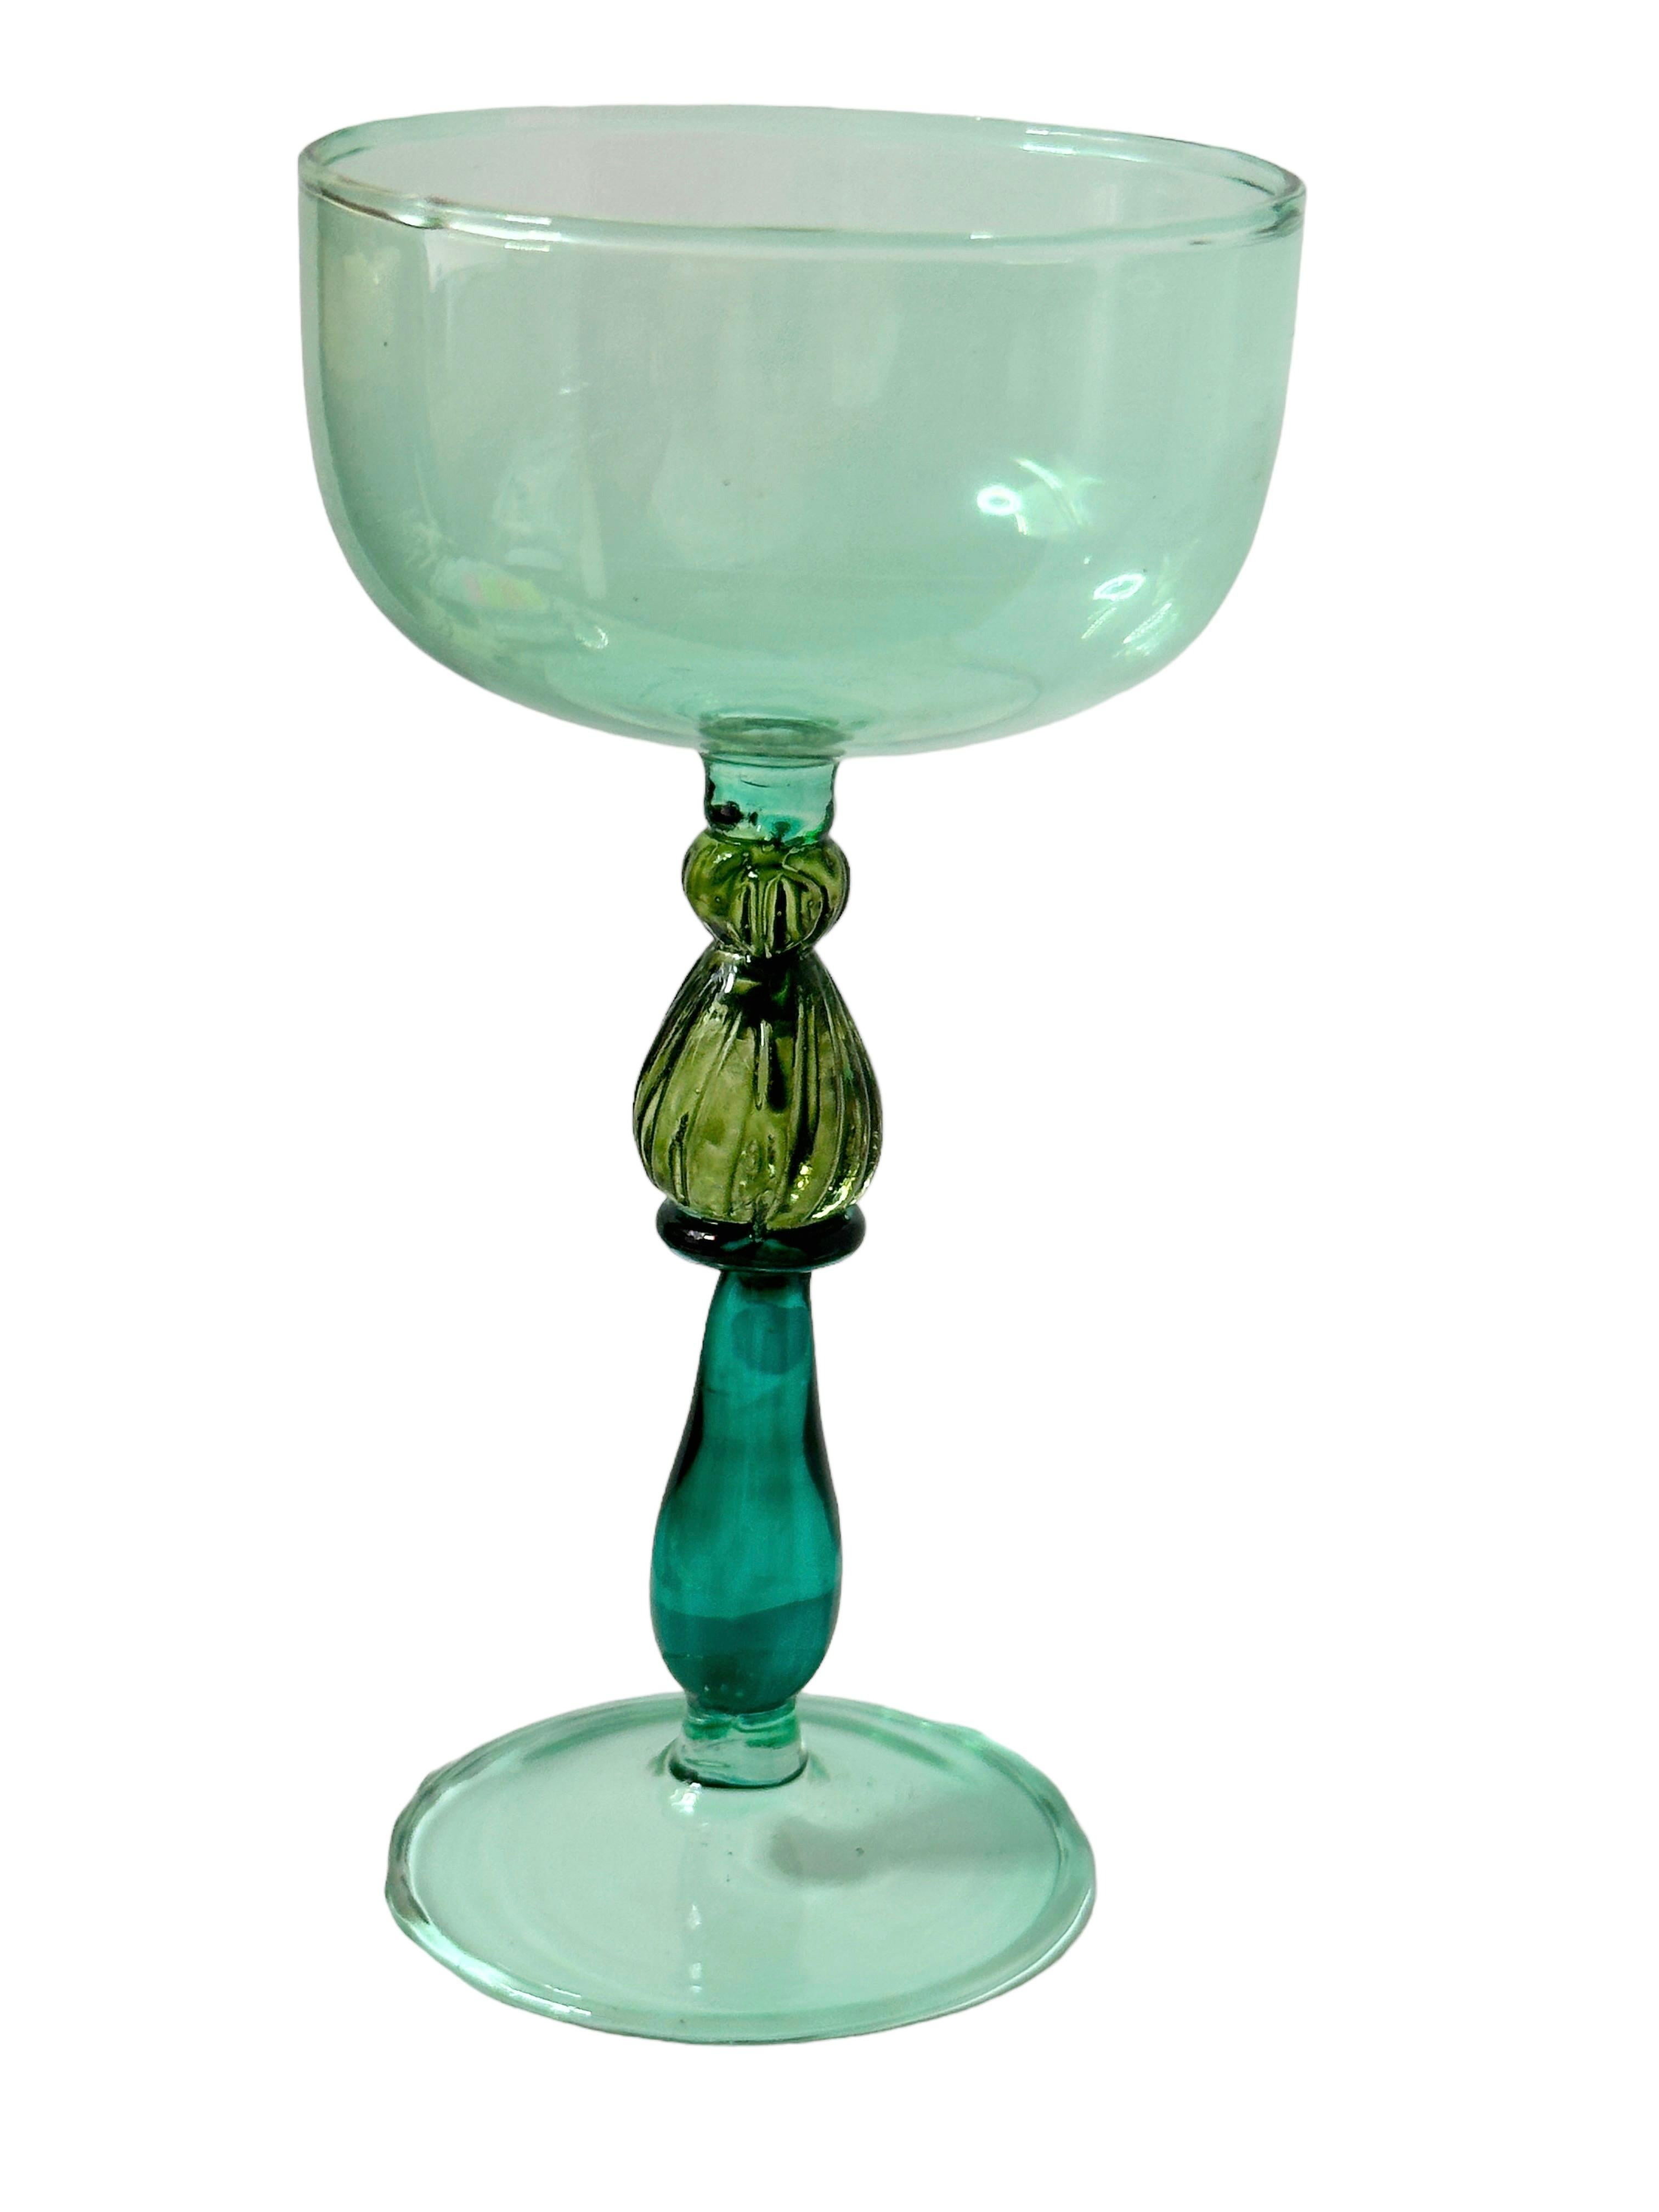 Italian Variations of Green Salviati Murano Glass Liqueur Goblet, Vintage Italy  For Sale